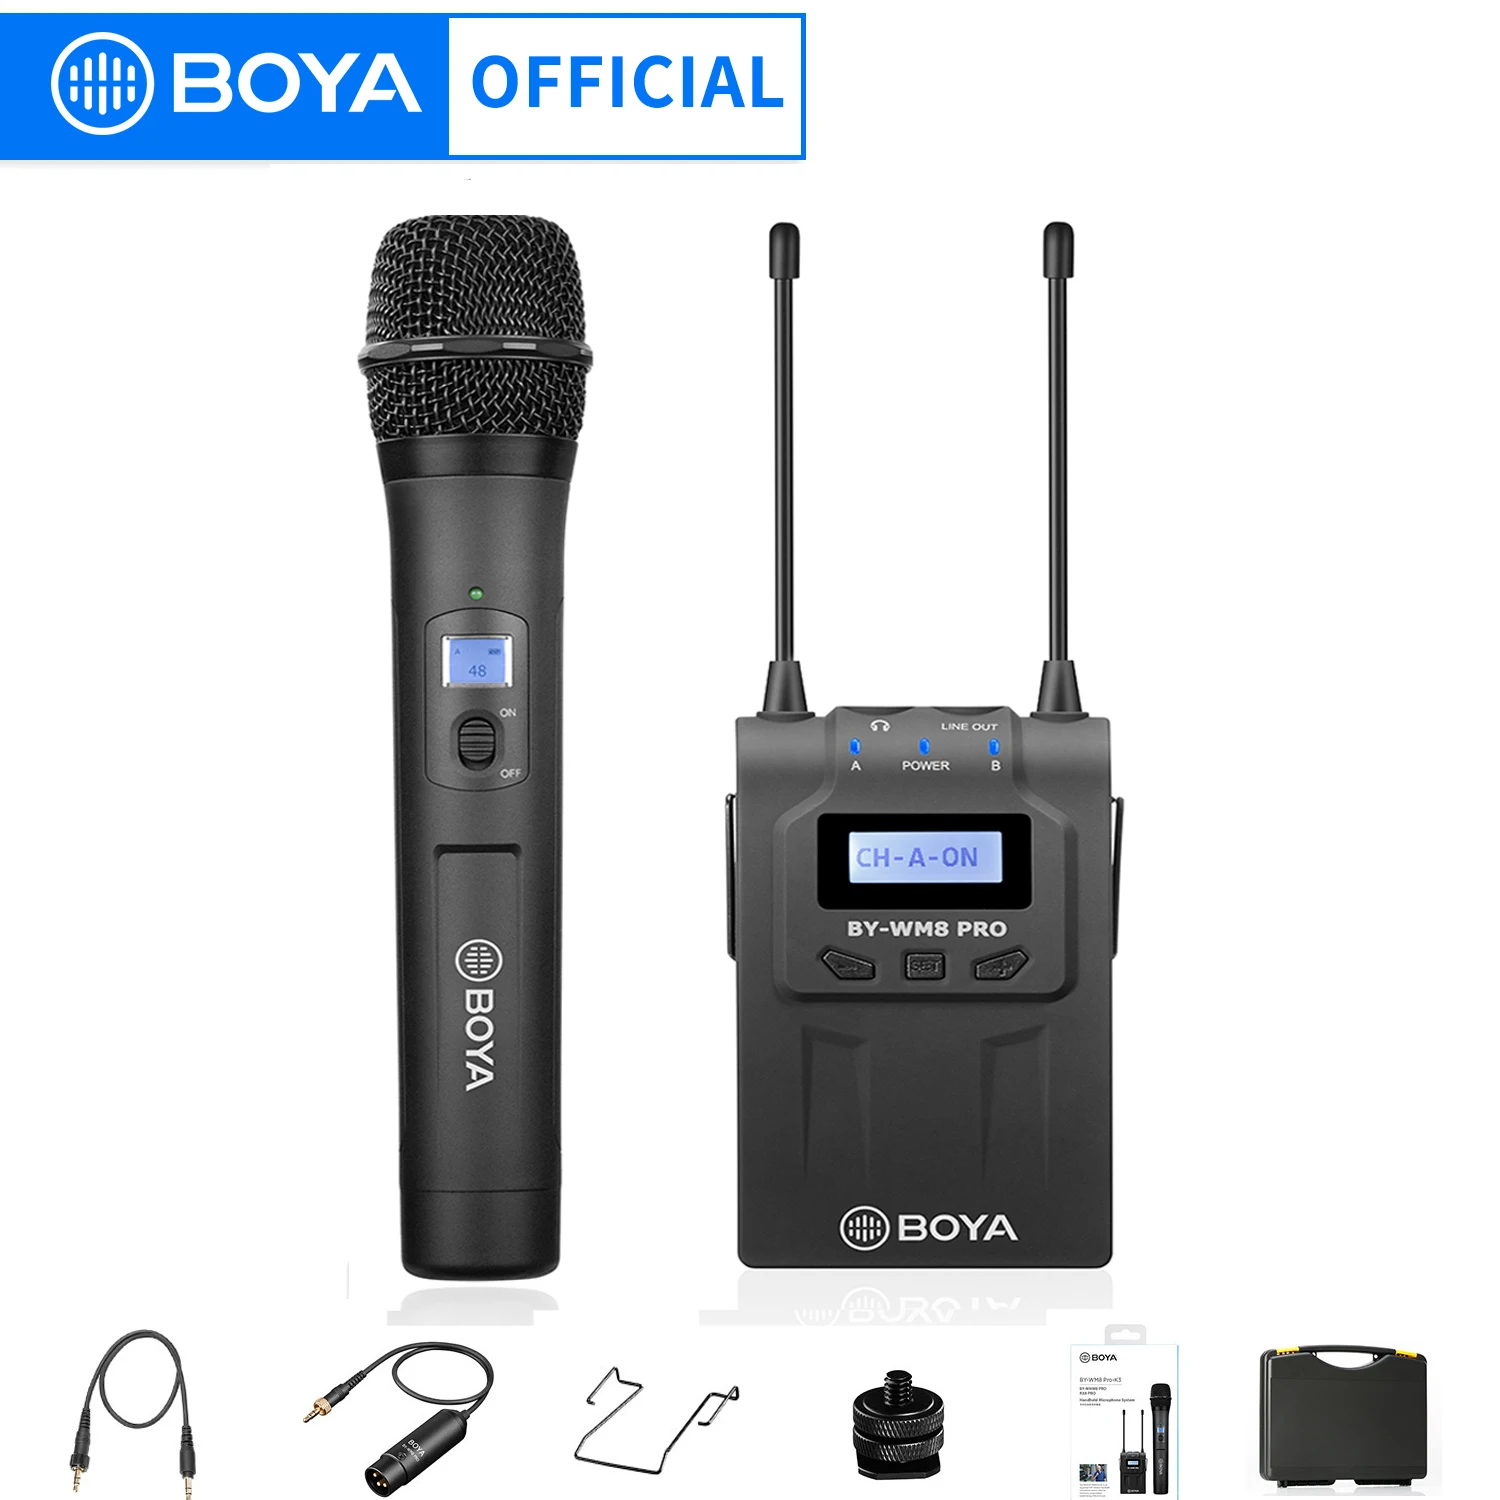 Wireless Microphone for Smartphone, Comica CVM-WS50(H) Handheld Microphone  for iPhone/Android Phones Interview, Professional Recording Mic for Sing